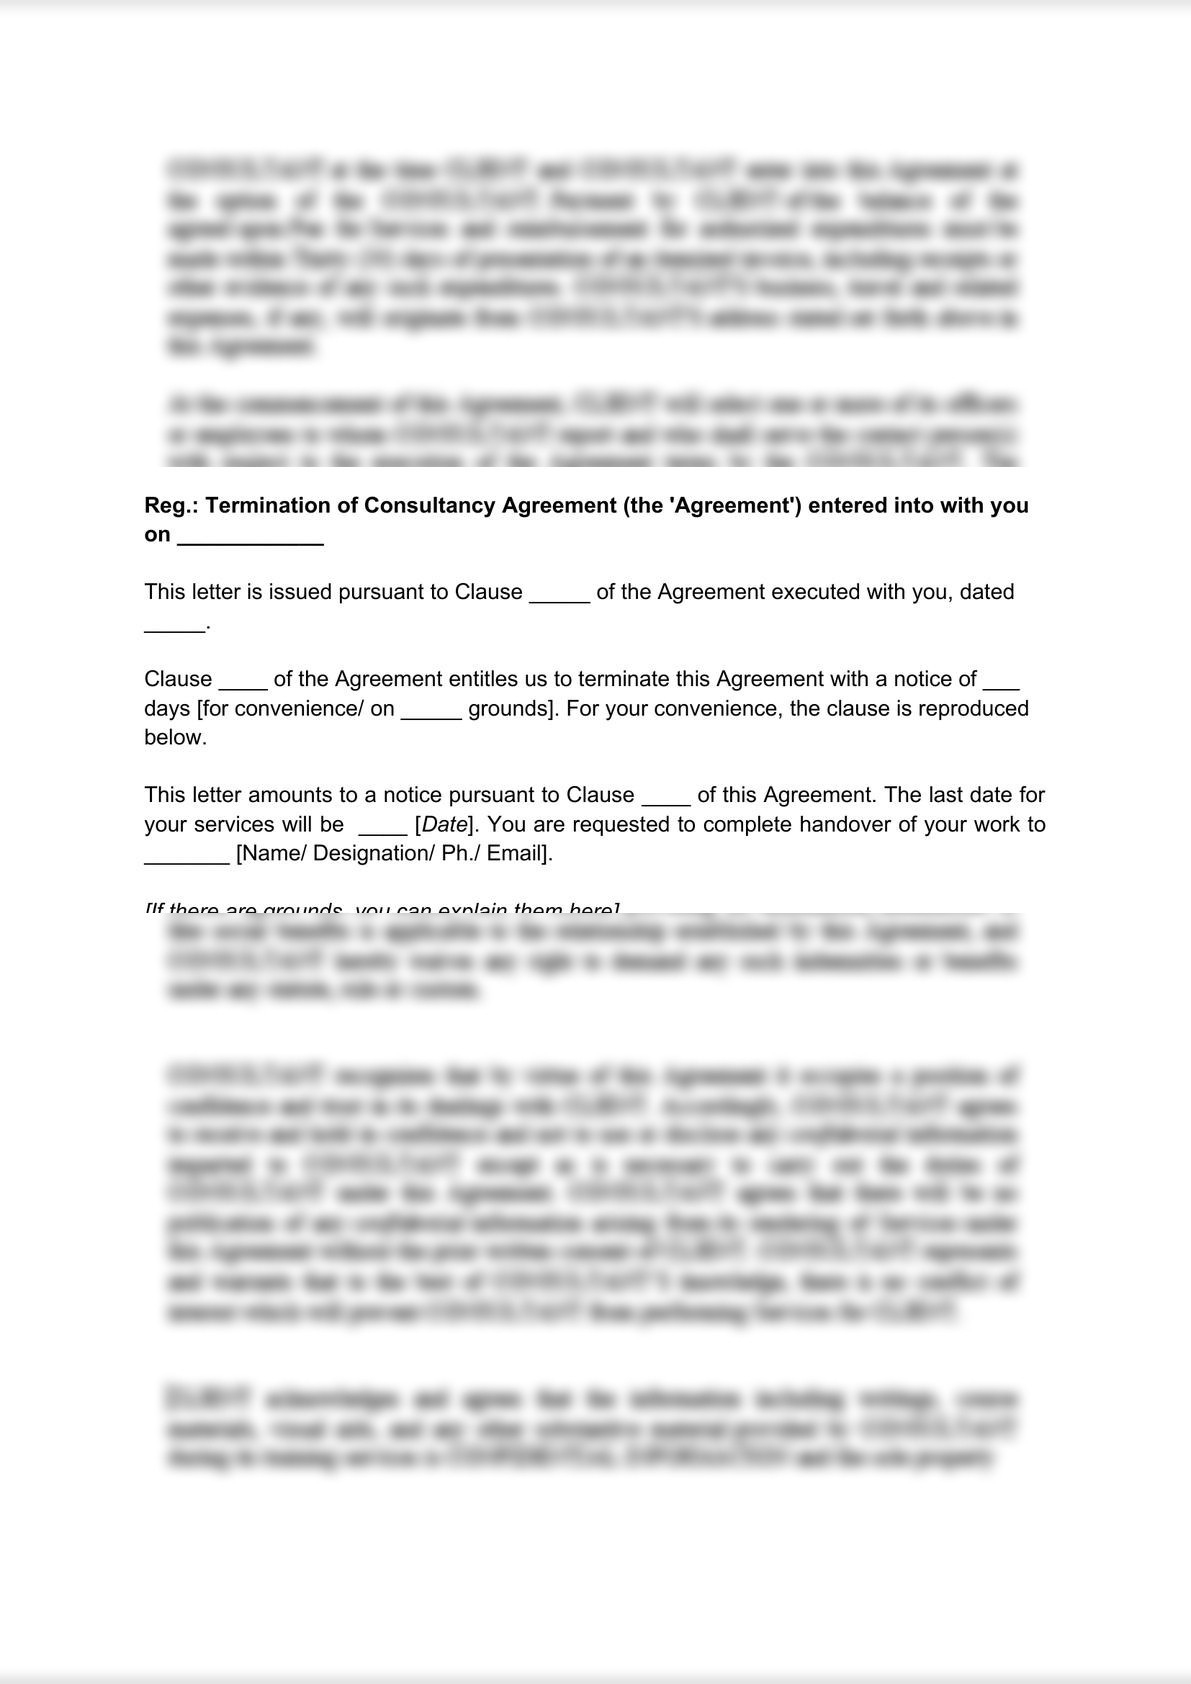 Termination of Consultancy Agreement -1